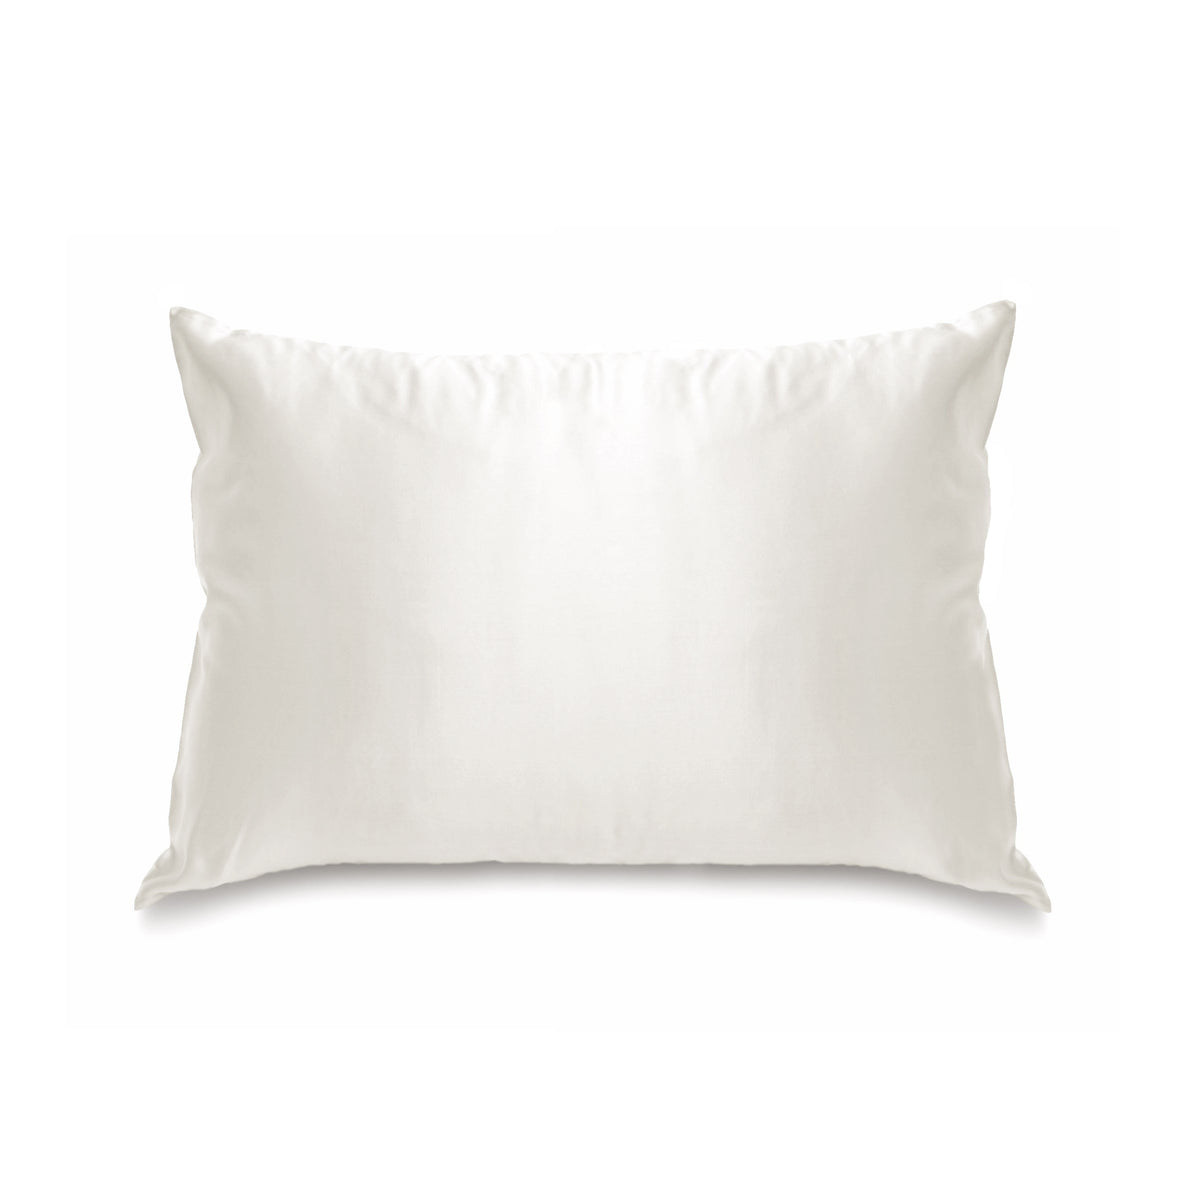 OUTLET Silk Pillowcase for Travel - Ivory